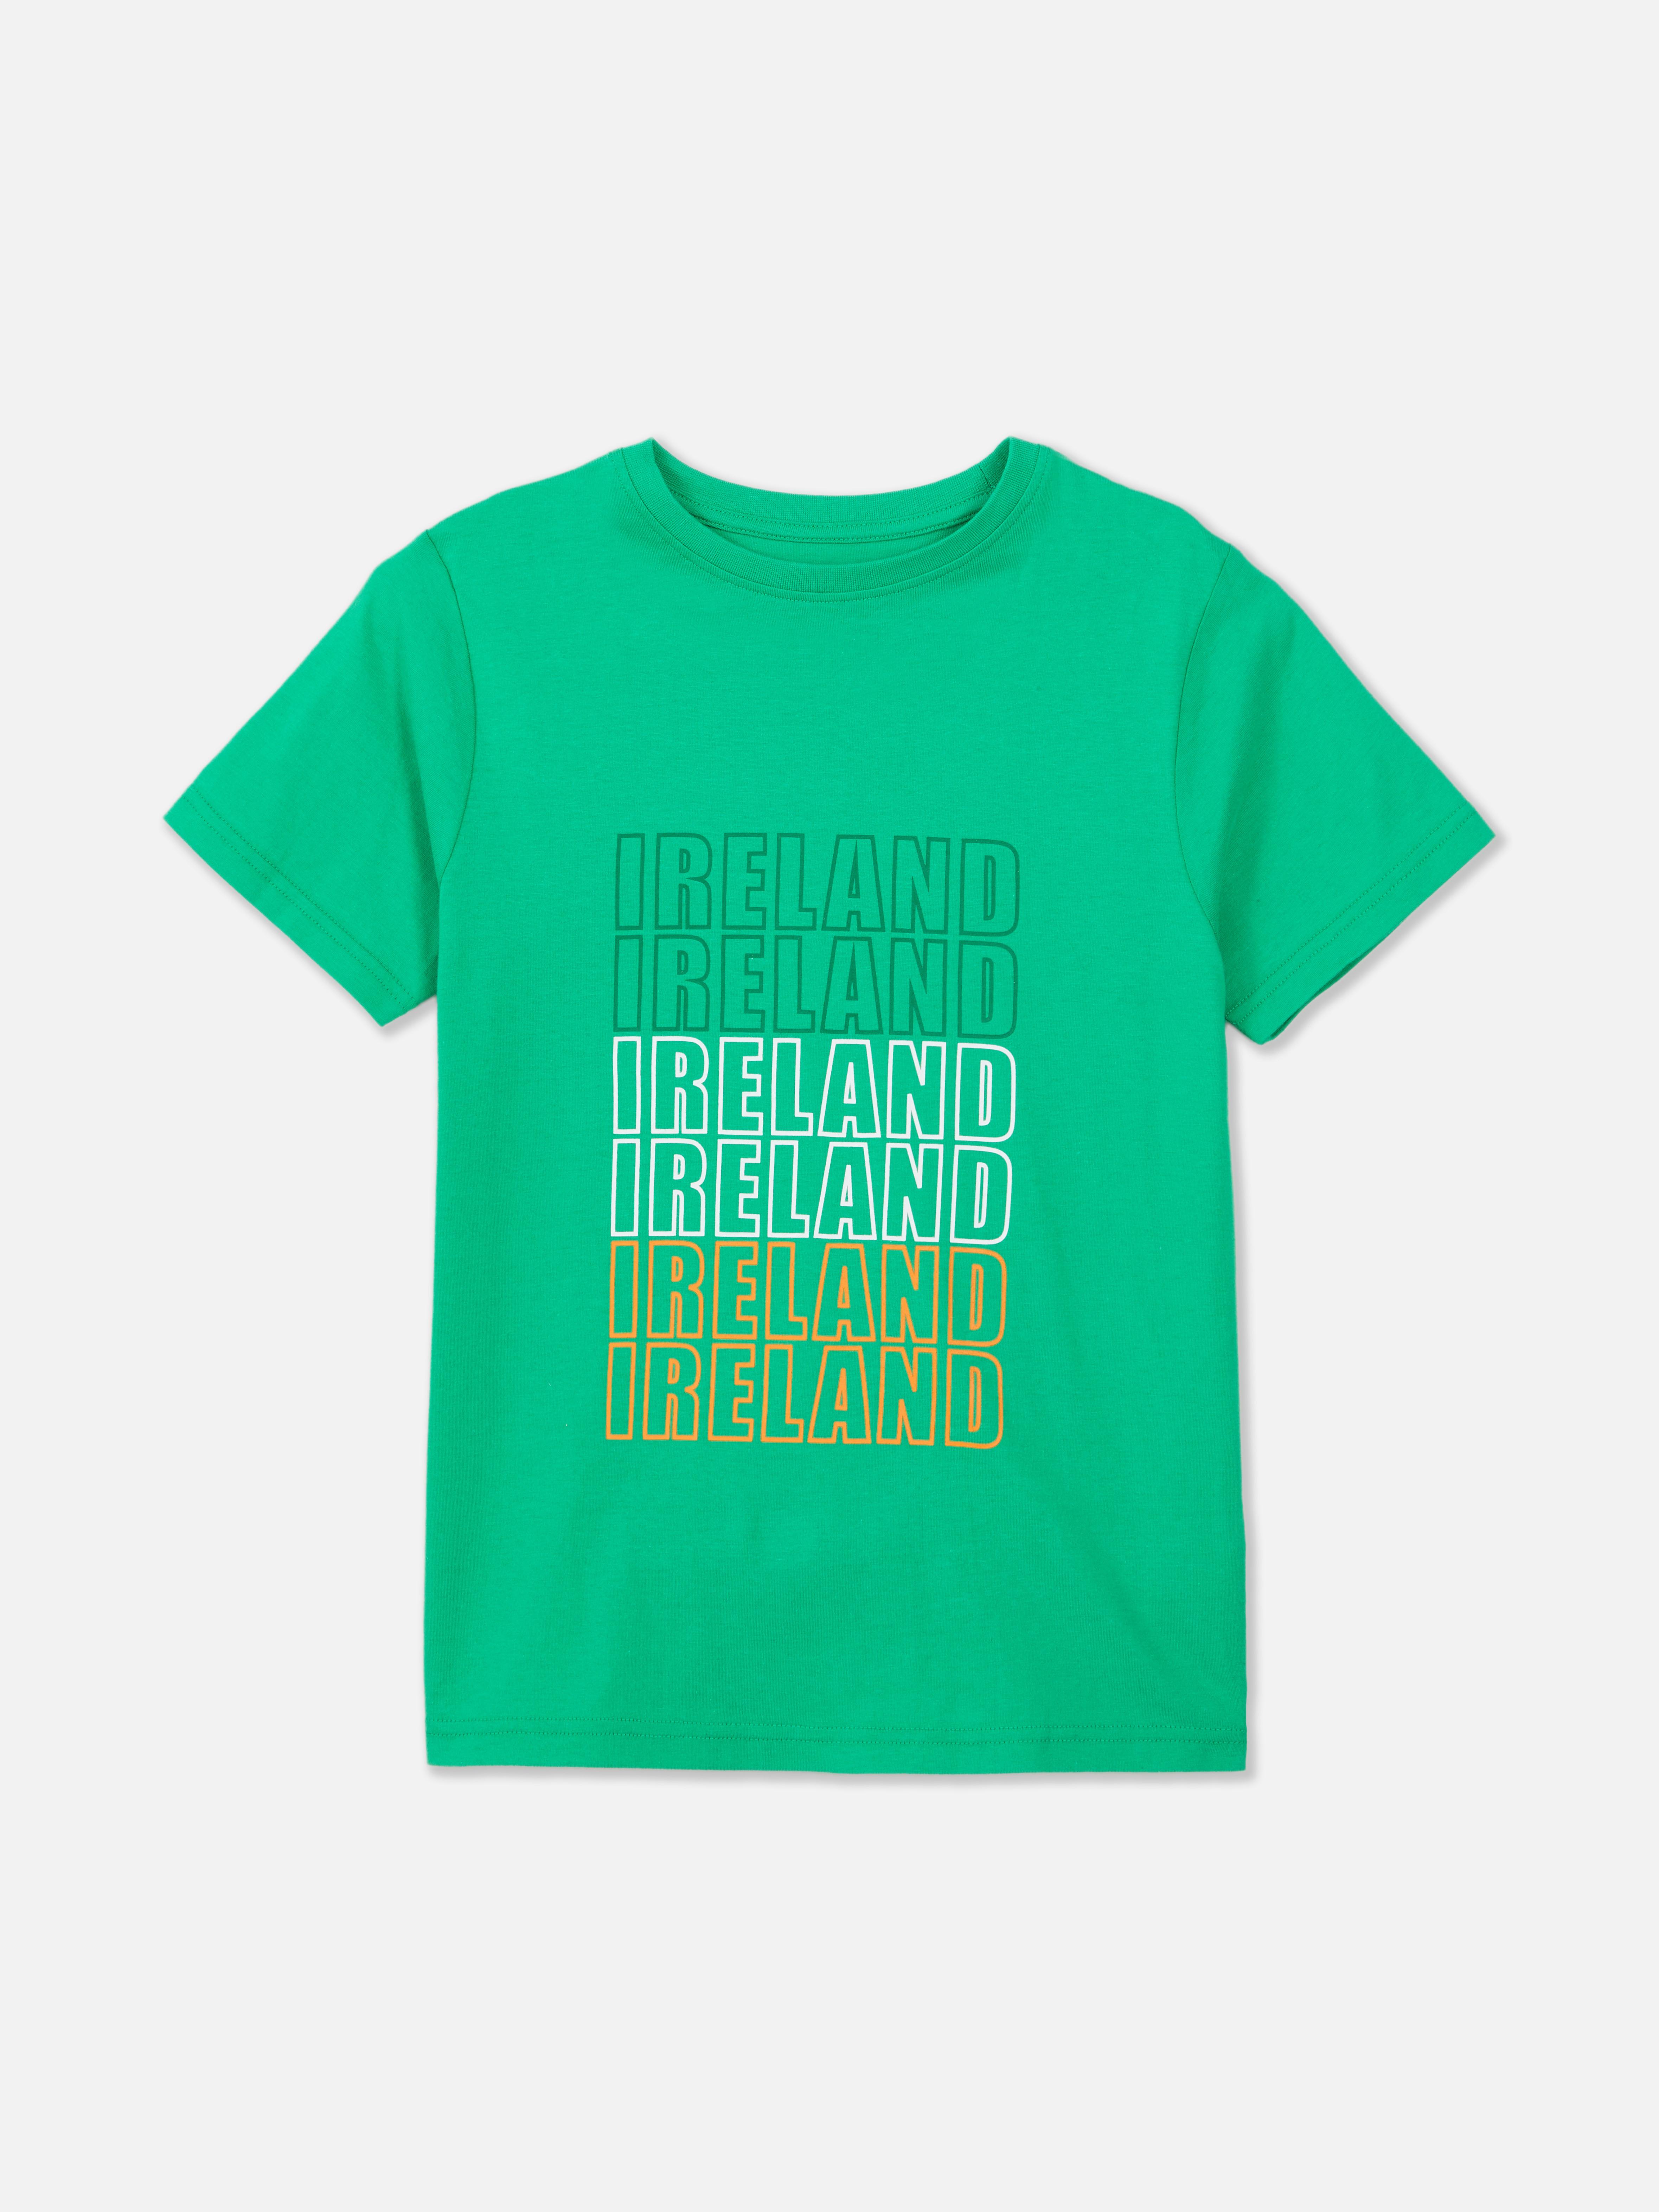 St. Patrick’s Day T-Shirt